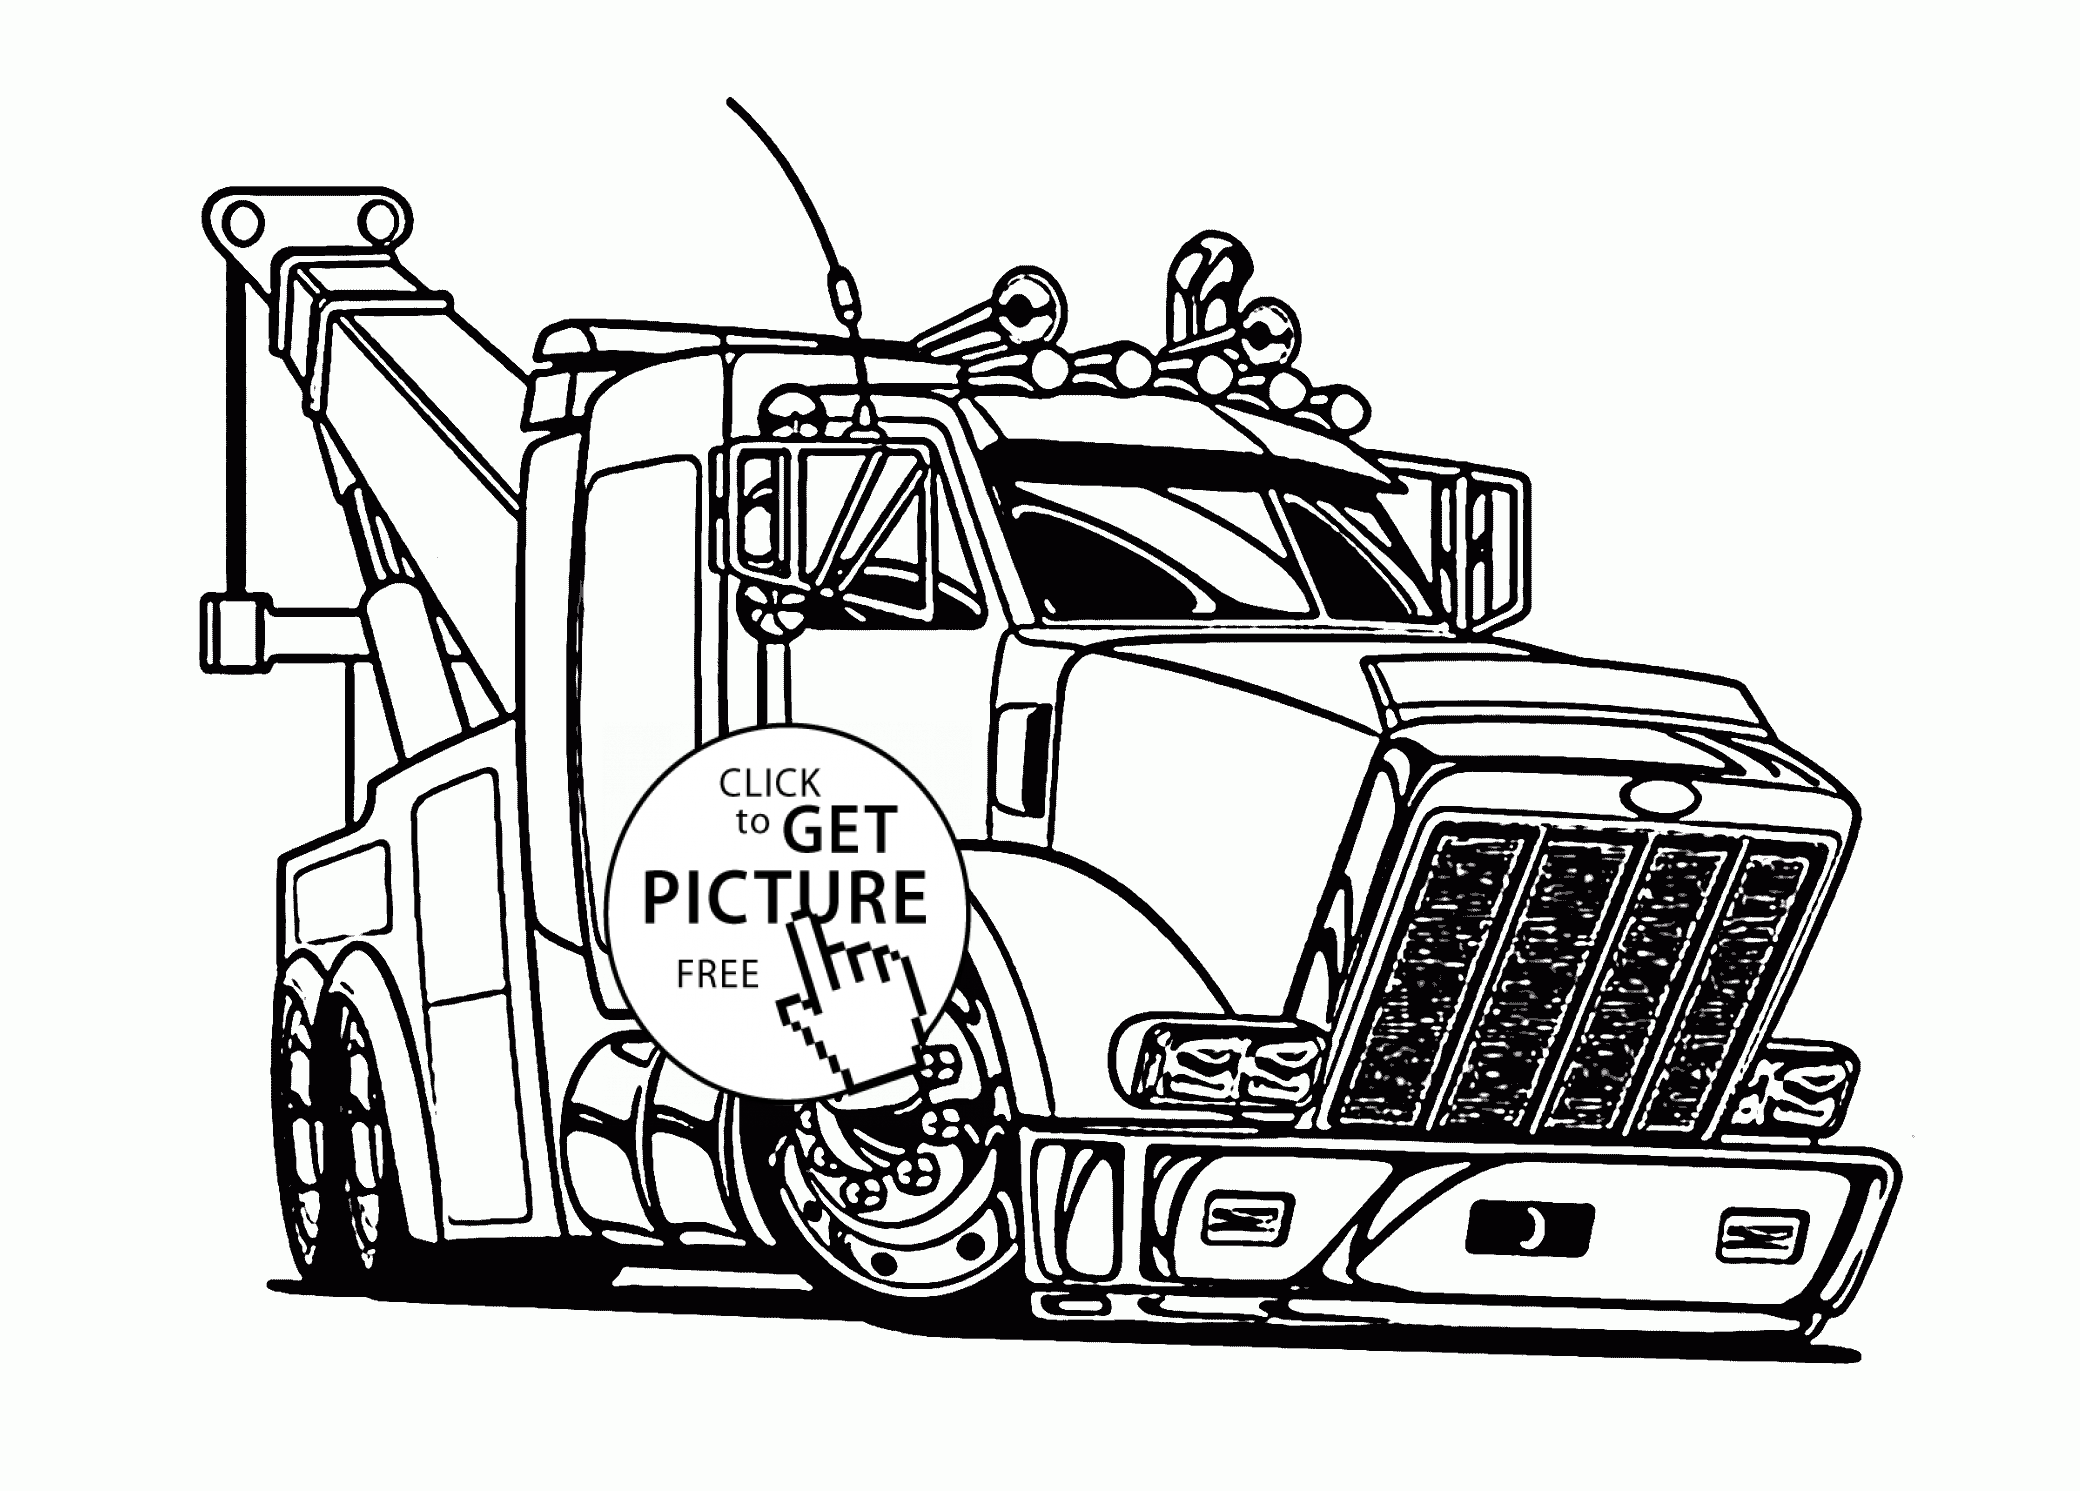 Free Tow Trucks Coloring Pages, Download Free Tow Trucks Coloring Pages